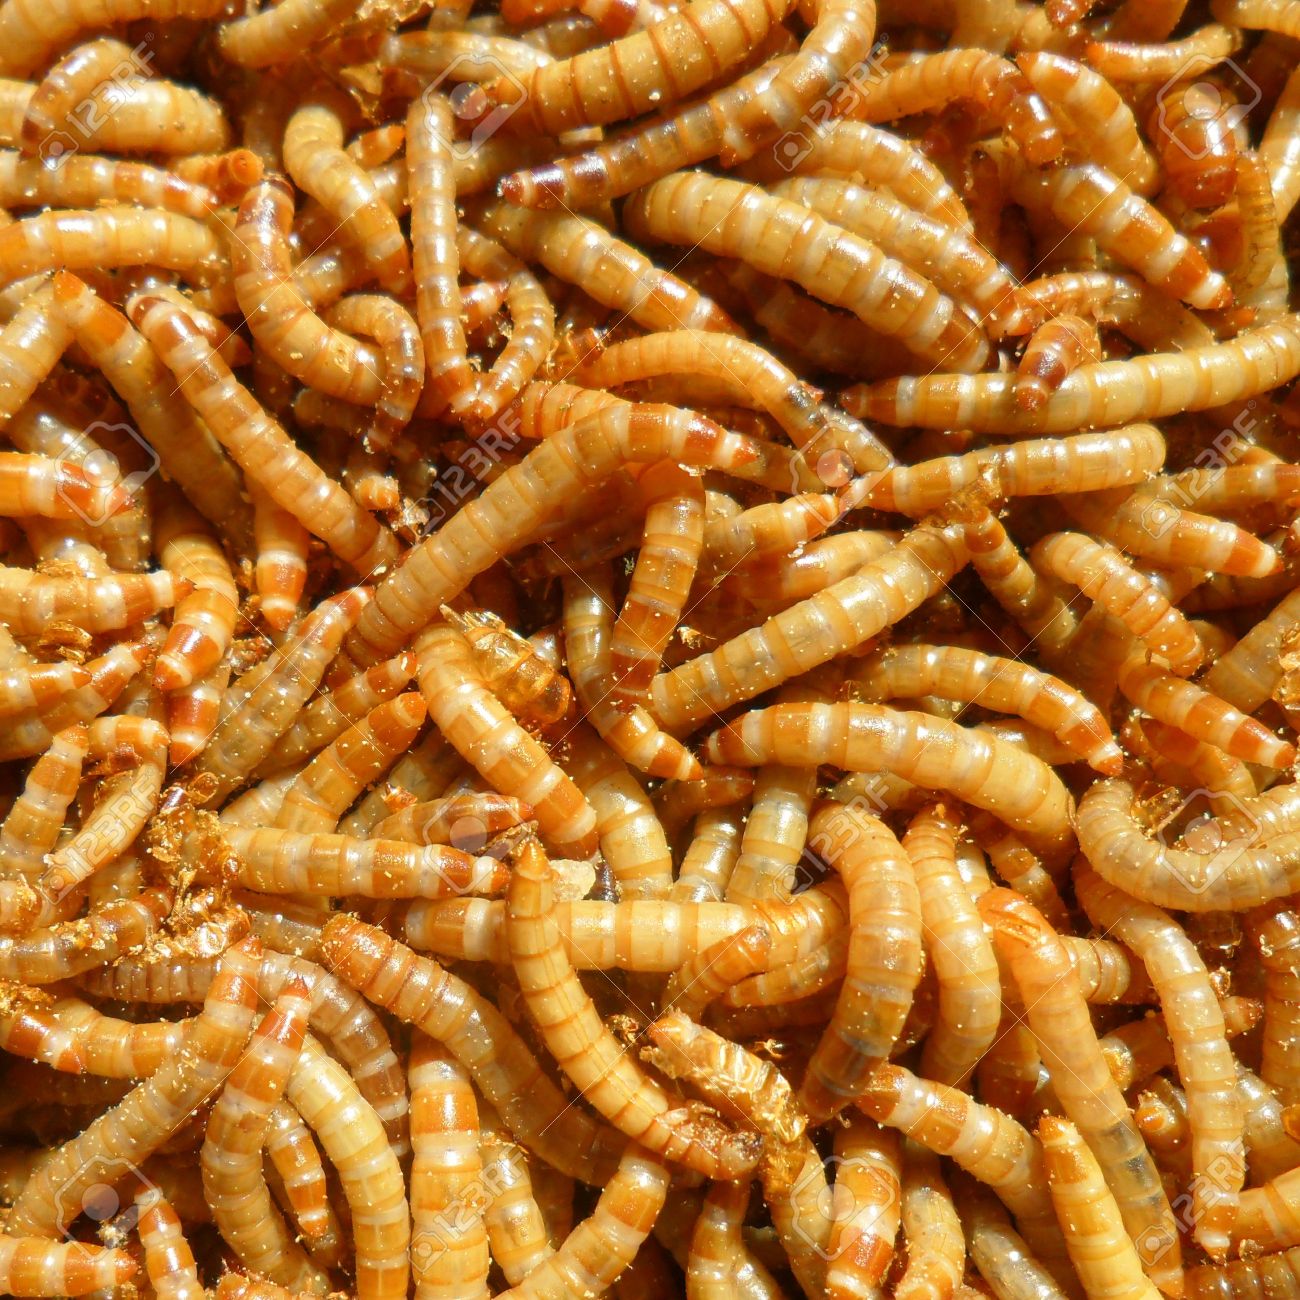 Many Ugly Worms As Background Stock Photo Picture And Royalty